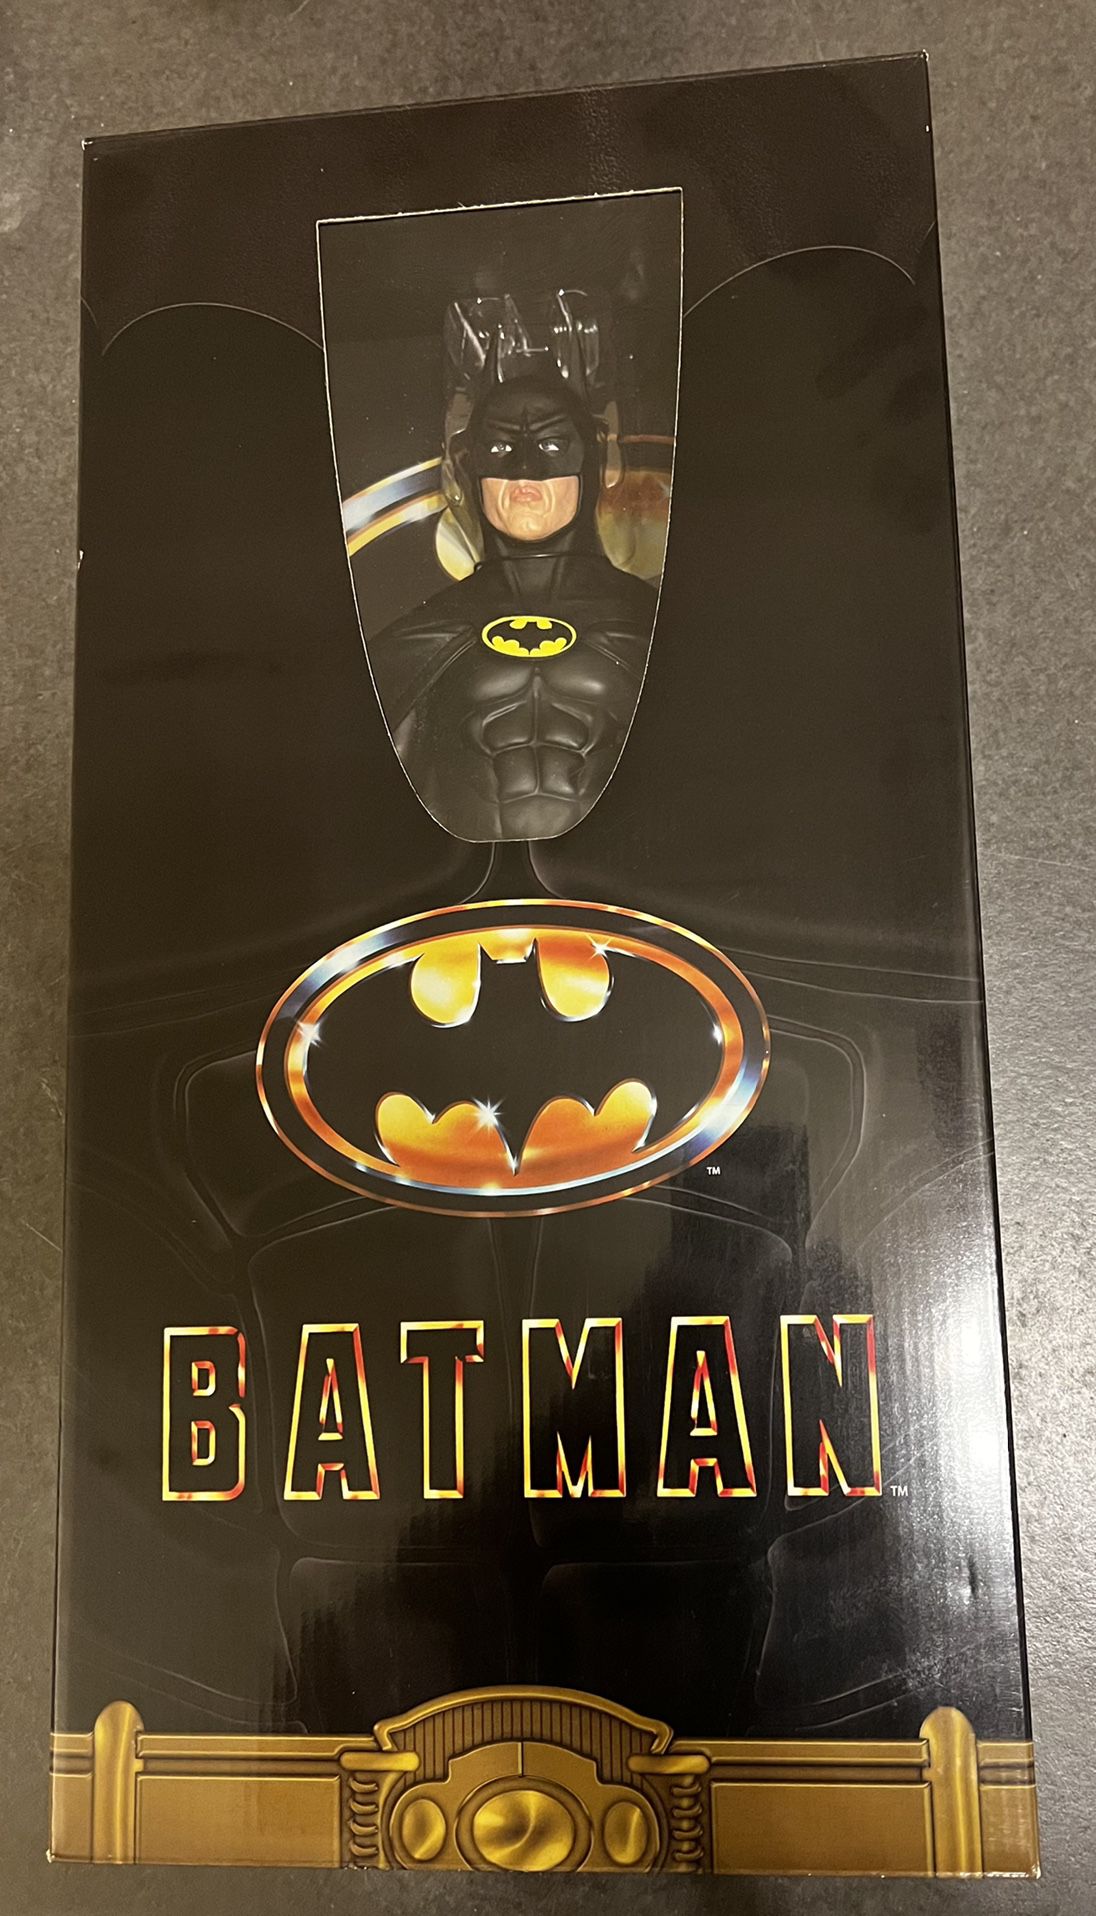 NECA Batman  Scale 1989 Batman Keaton 18-in Action Figure Sealed And  Never Opened . for Sale in El Paso, TX - OfferUp